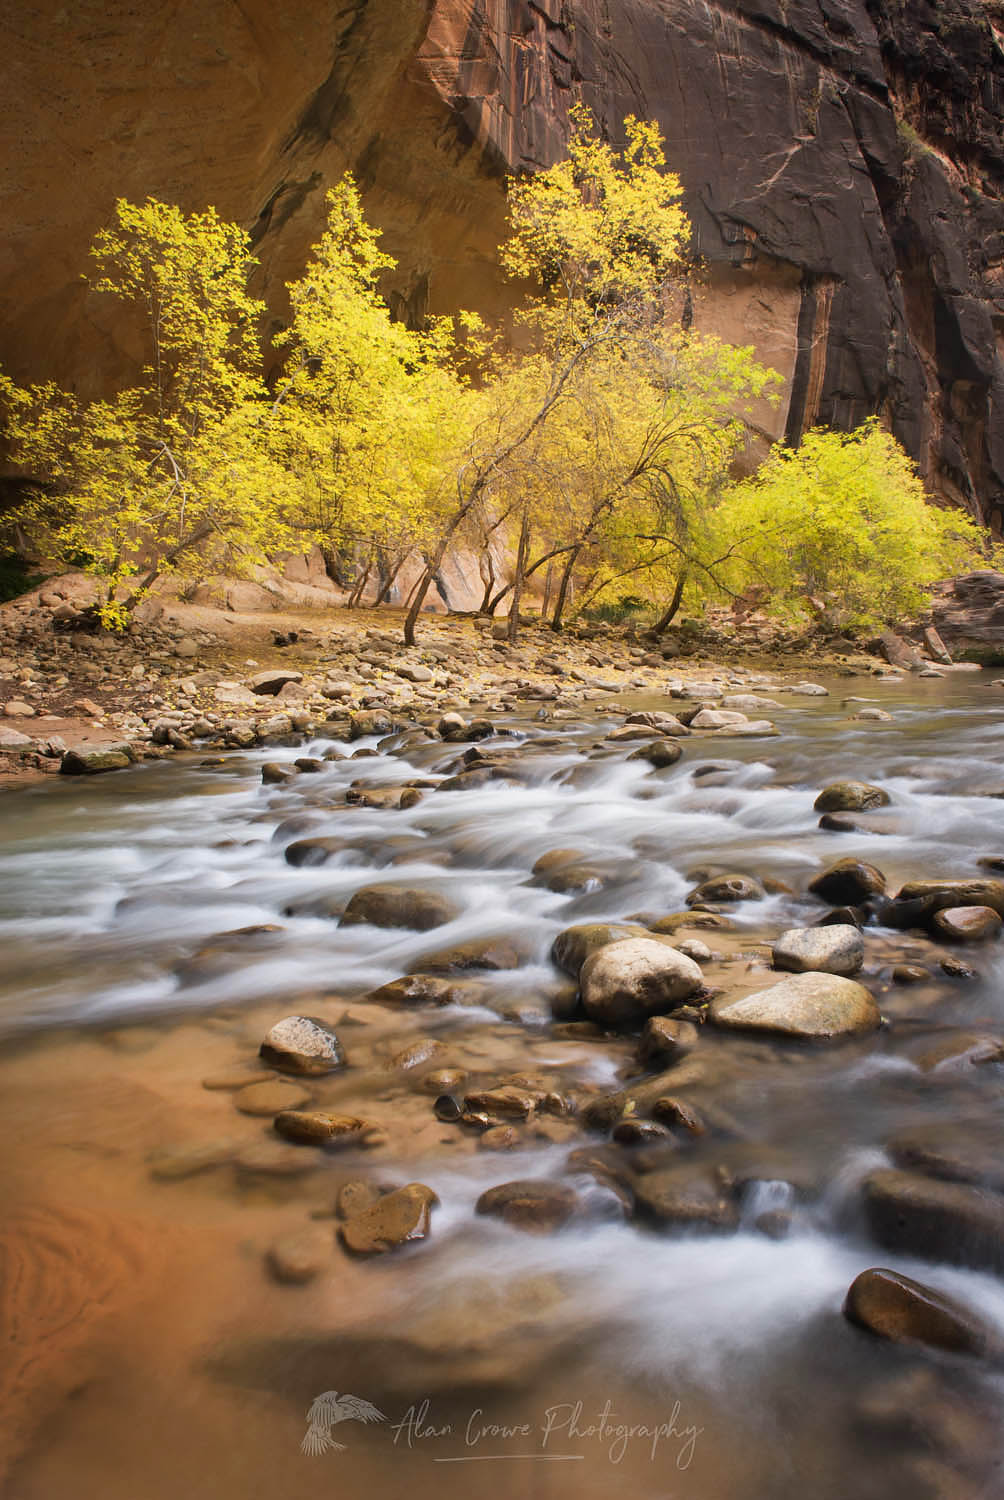 Trees displaying fall foliage along the Virgin River in the Zion Canyon Narrows, Zion National Park Utah #09526